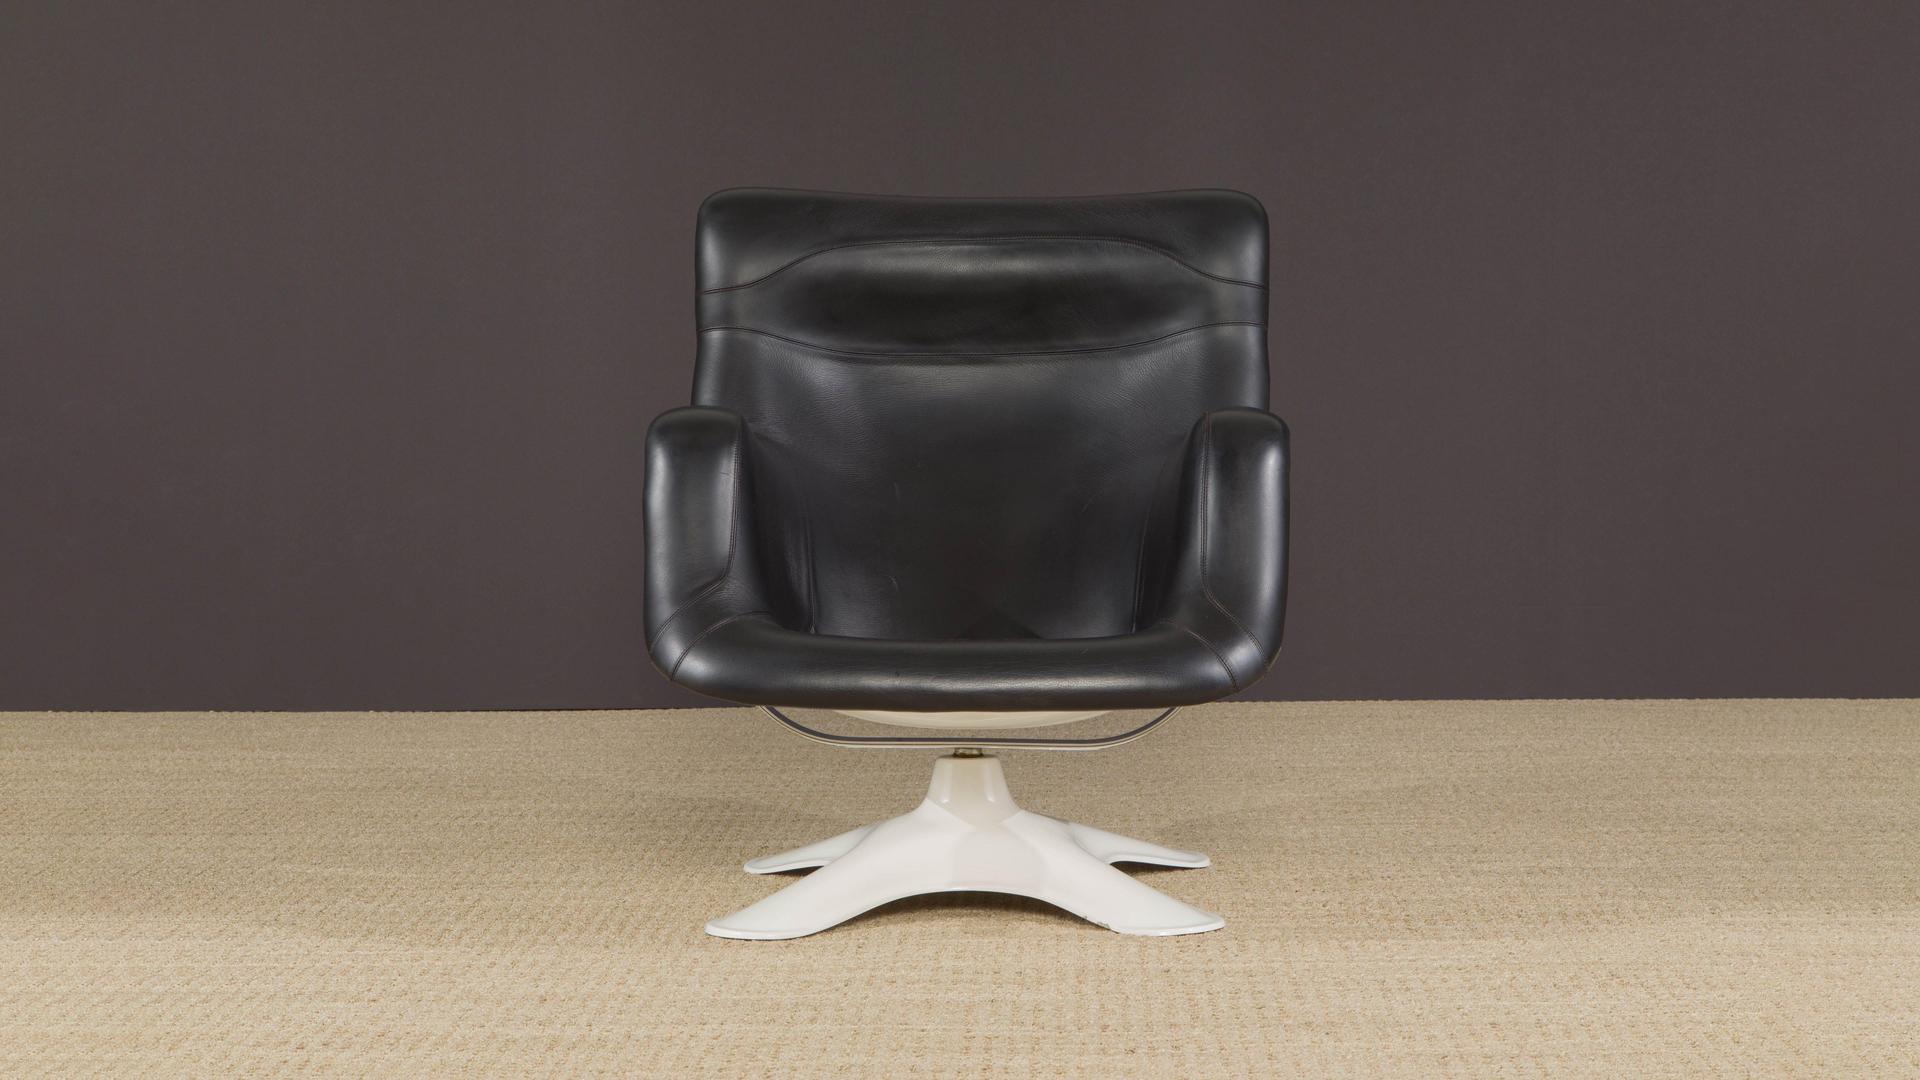 This 'Karuselli' swivel lounge chair by Yrjo¨ Kukkapuro, originally designed in 1964, features a strong fiberglass shell, soft black leather upholstery, and a chromed steel swivel mechanism that rotates and tilts to achieve the most comfortable